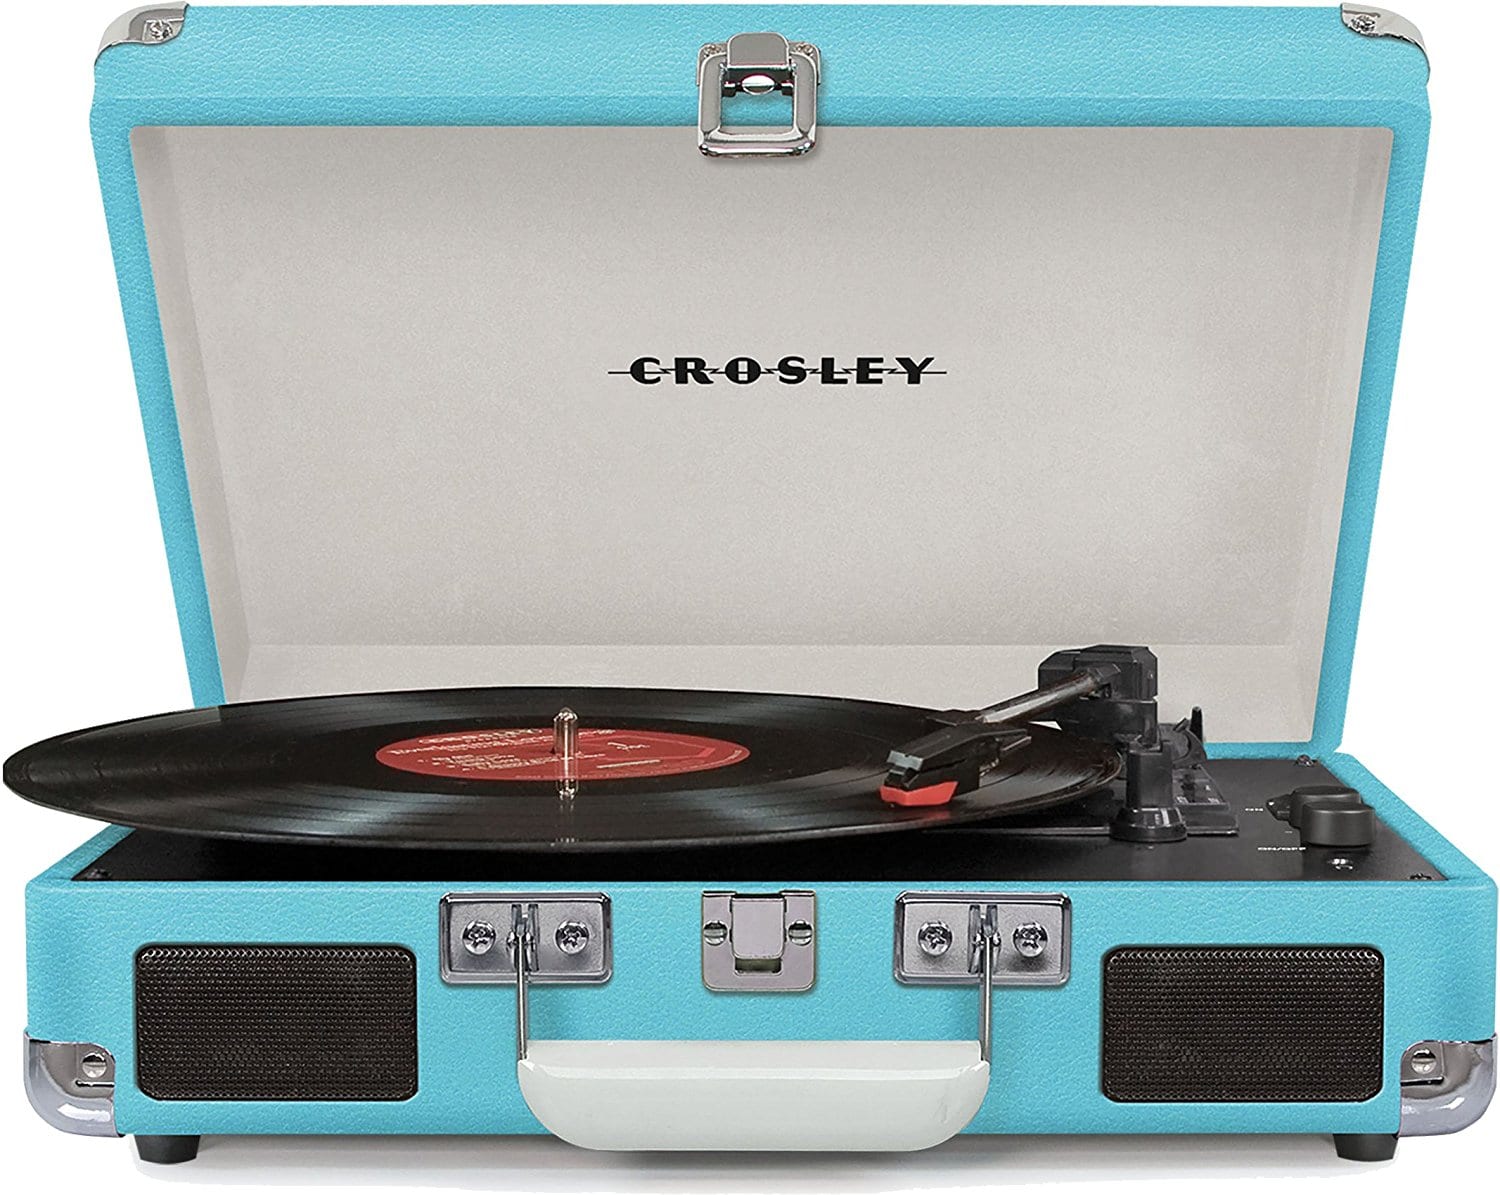 Best Turntable & Record Player 2017: Crosley Turquoise Blue